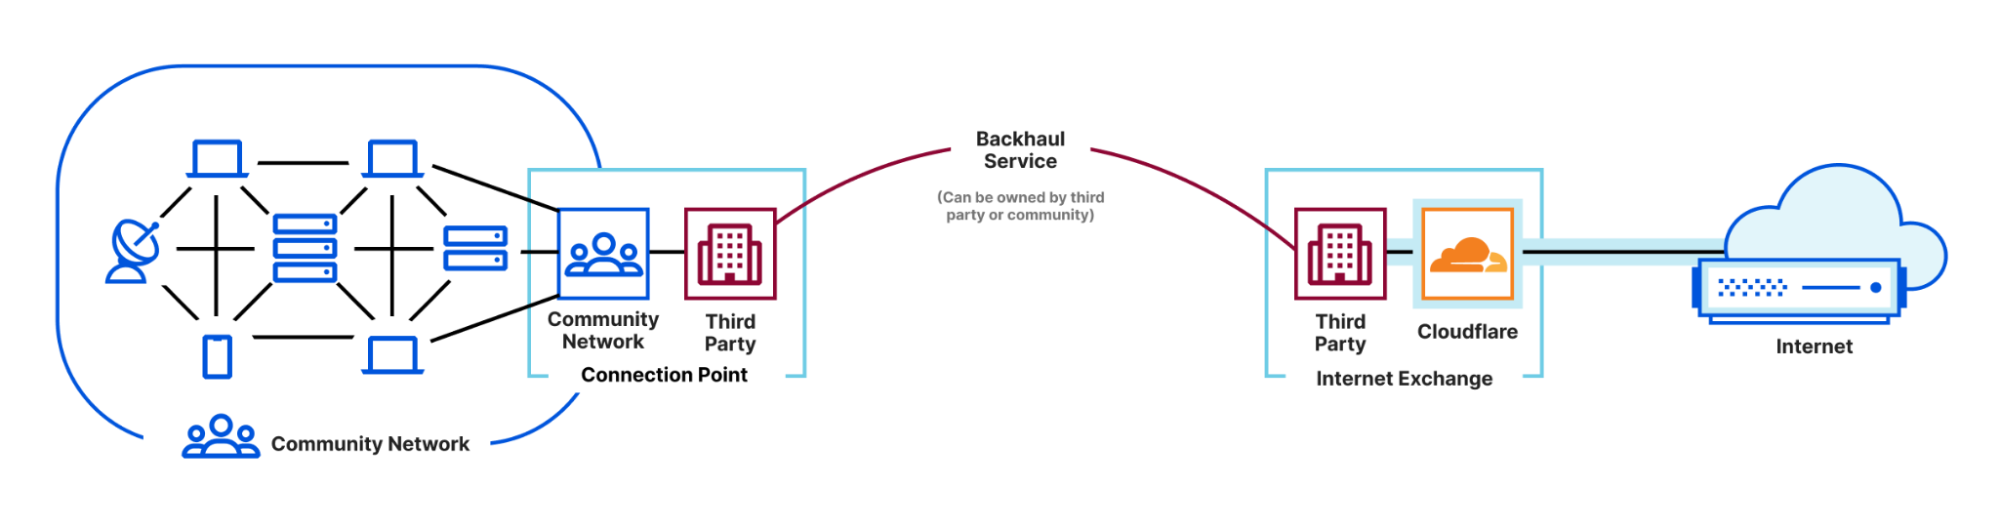 Conventional point-to-point backhaul